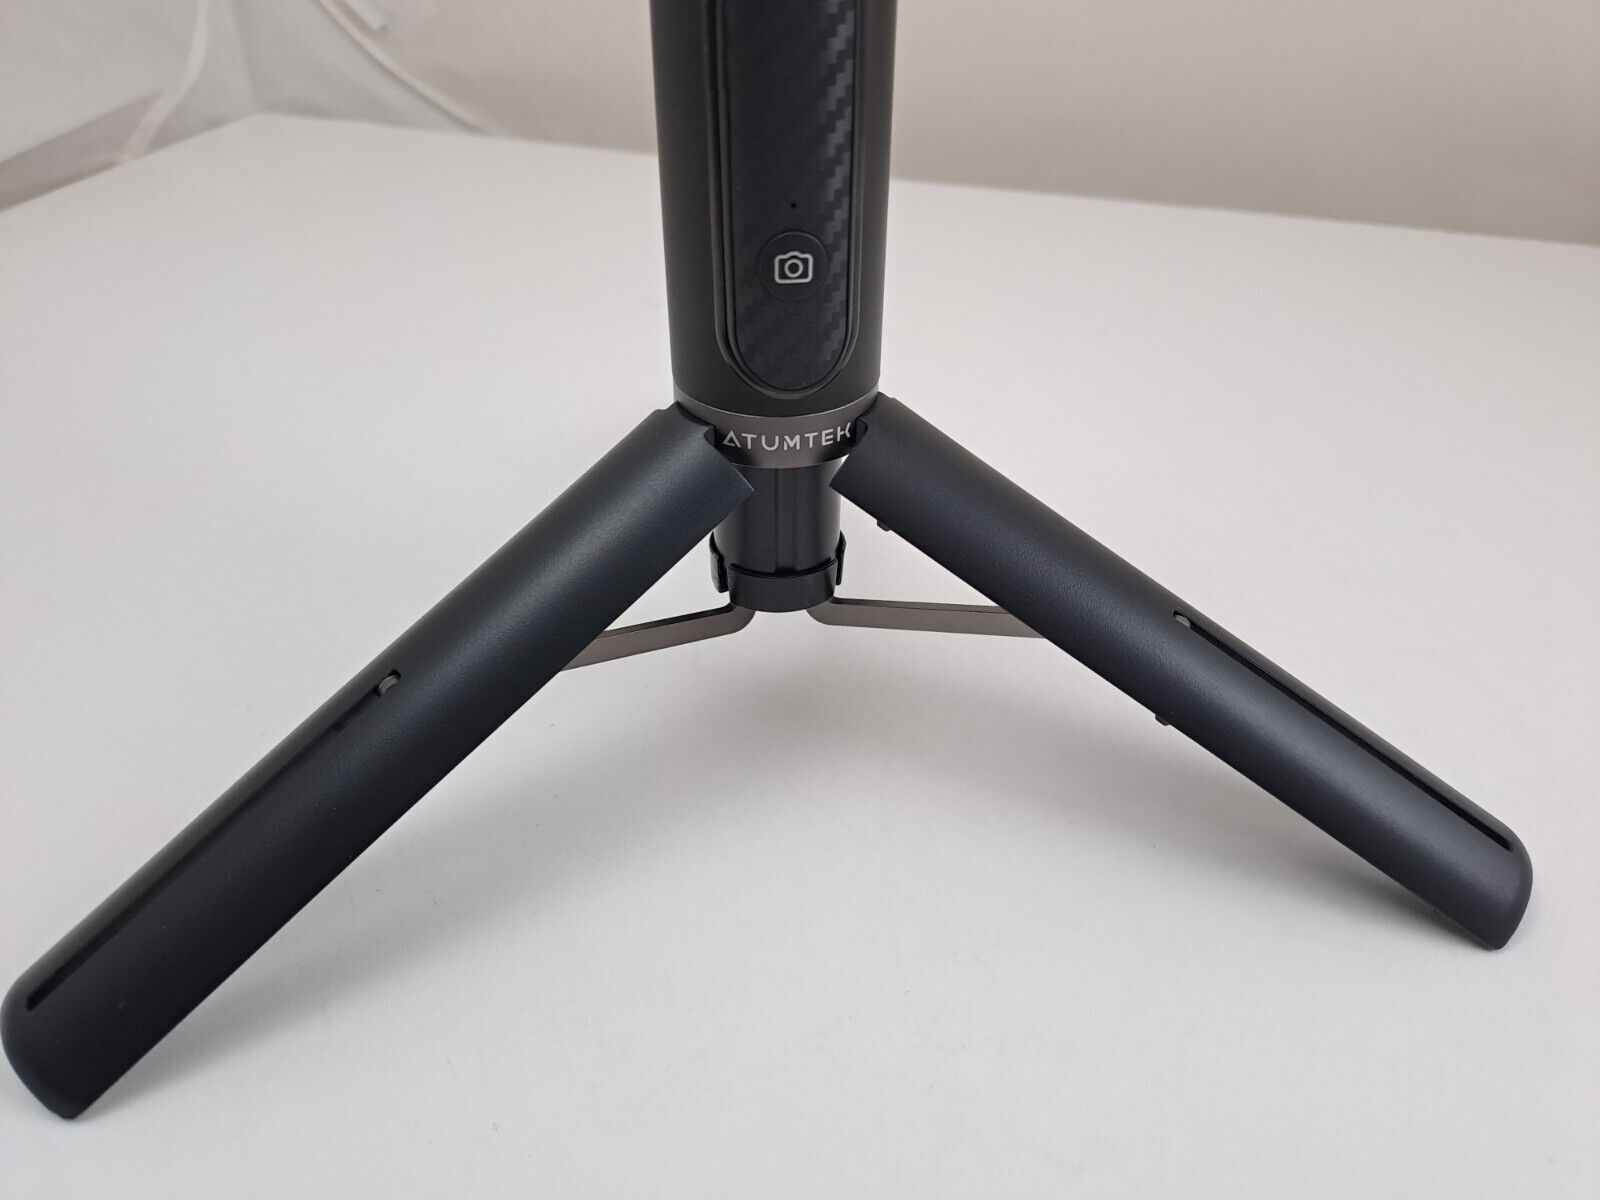 Atumtek Tripod Guide: Maximizing The Features And Functions Of The Atumtek Tripod